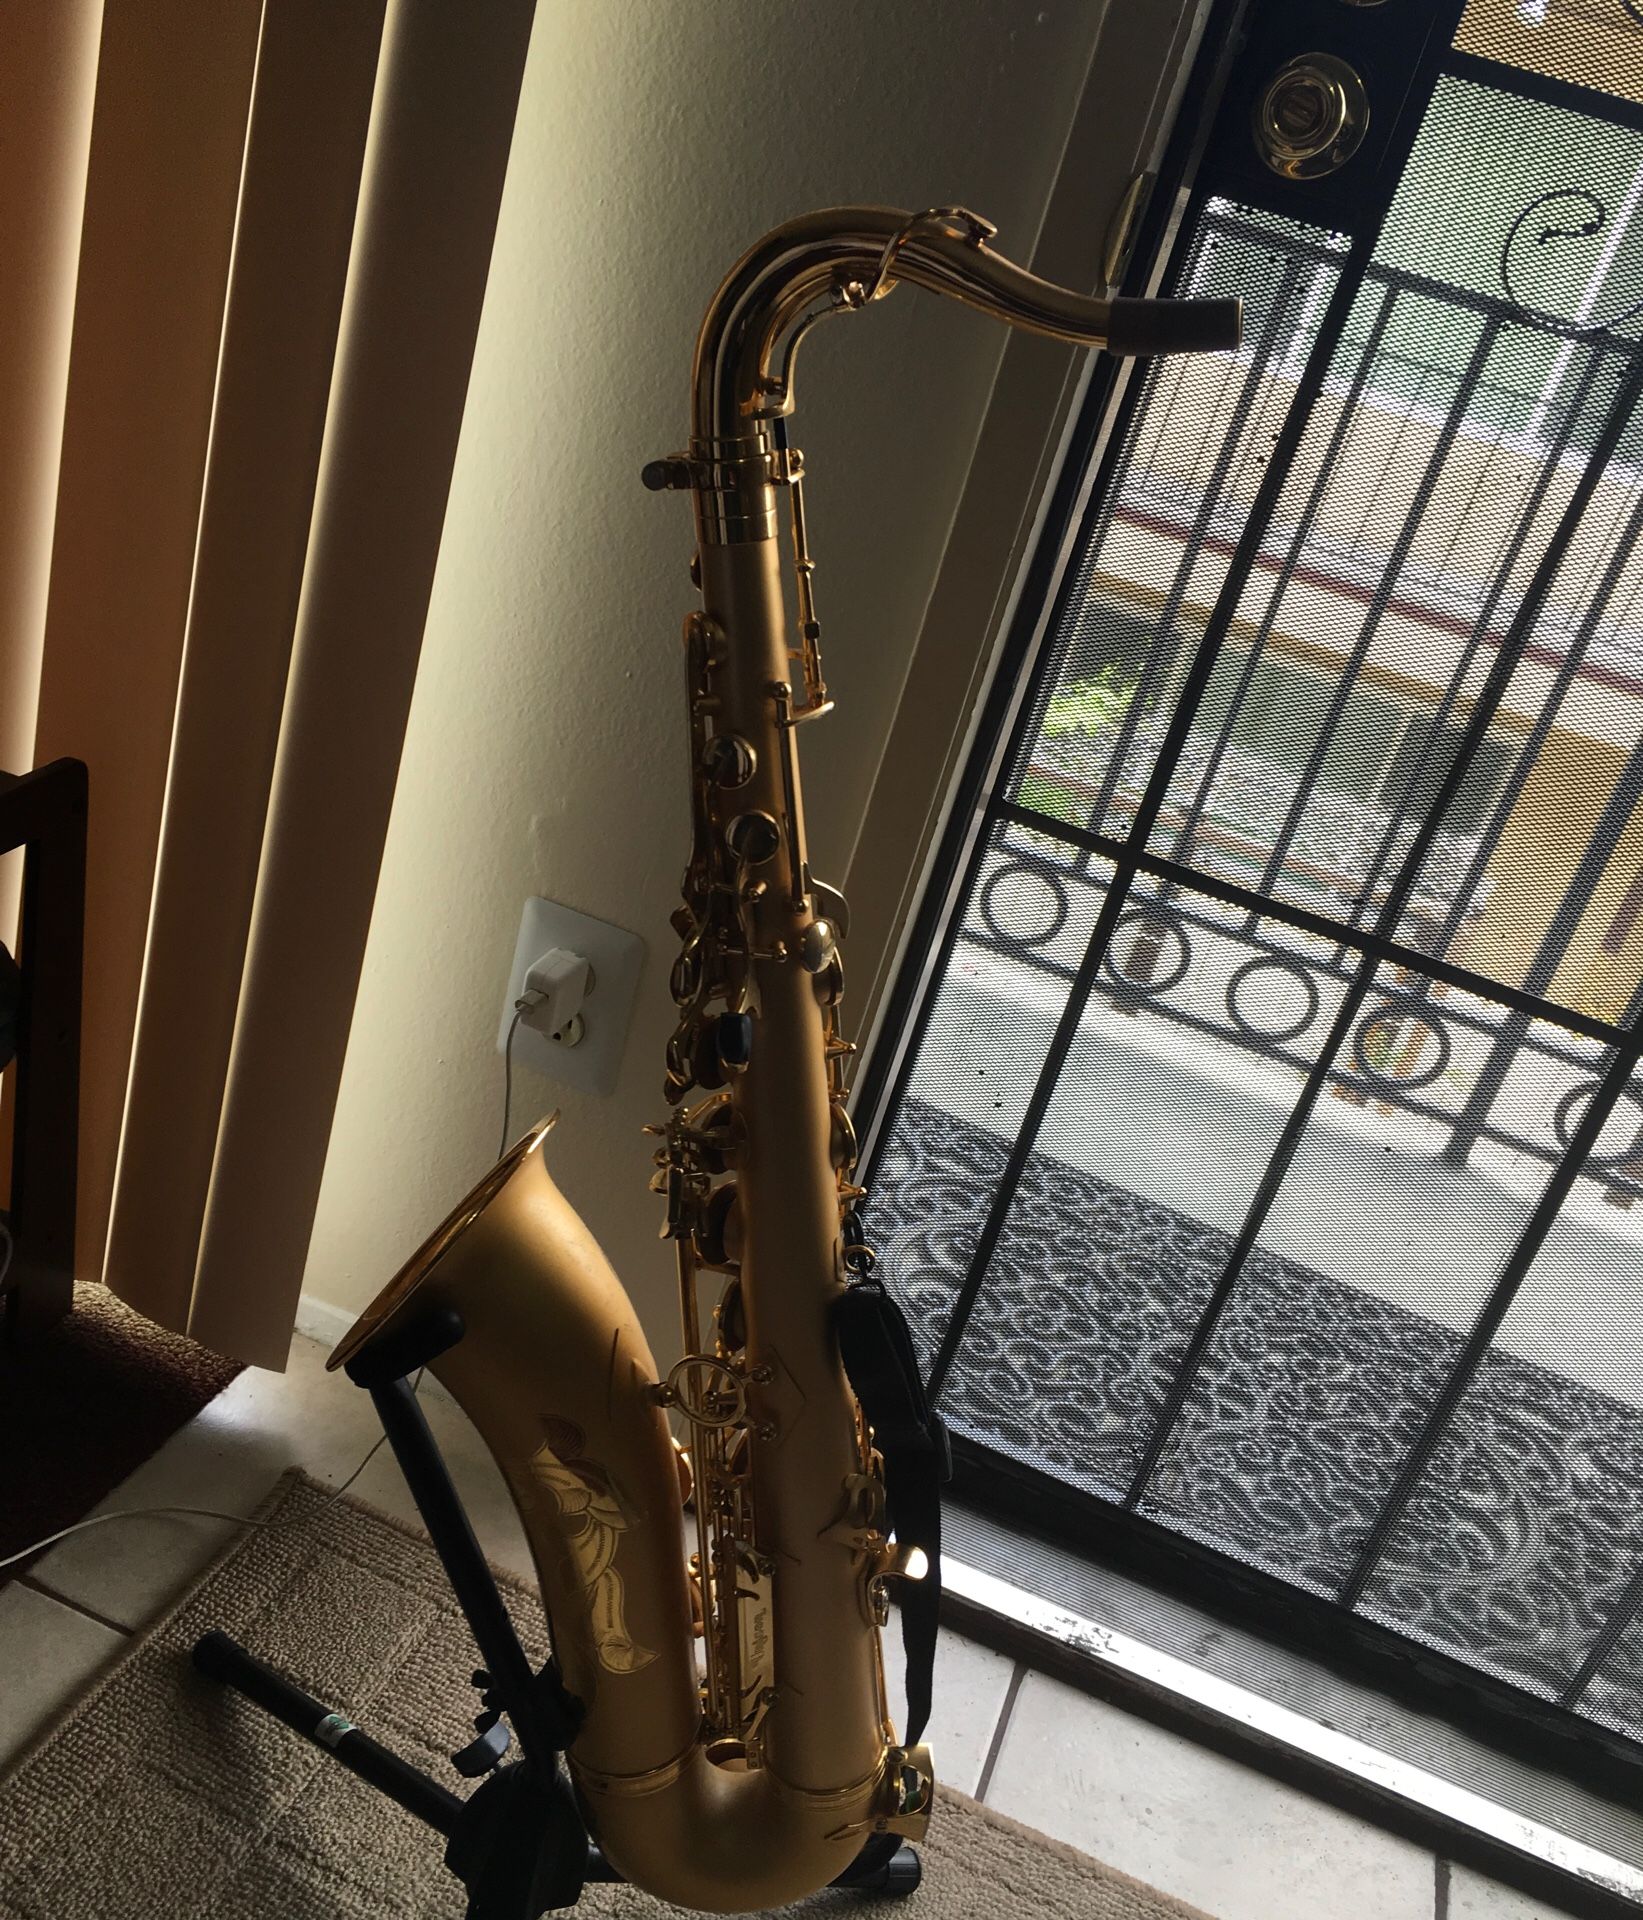 Saxophone Unison Hollywood- New York S400 series gold metal Great Condition comes with original case, and with a neck strap. stand not included great